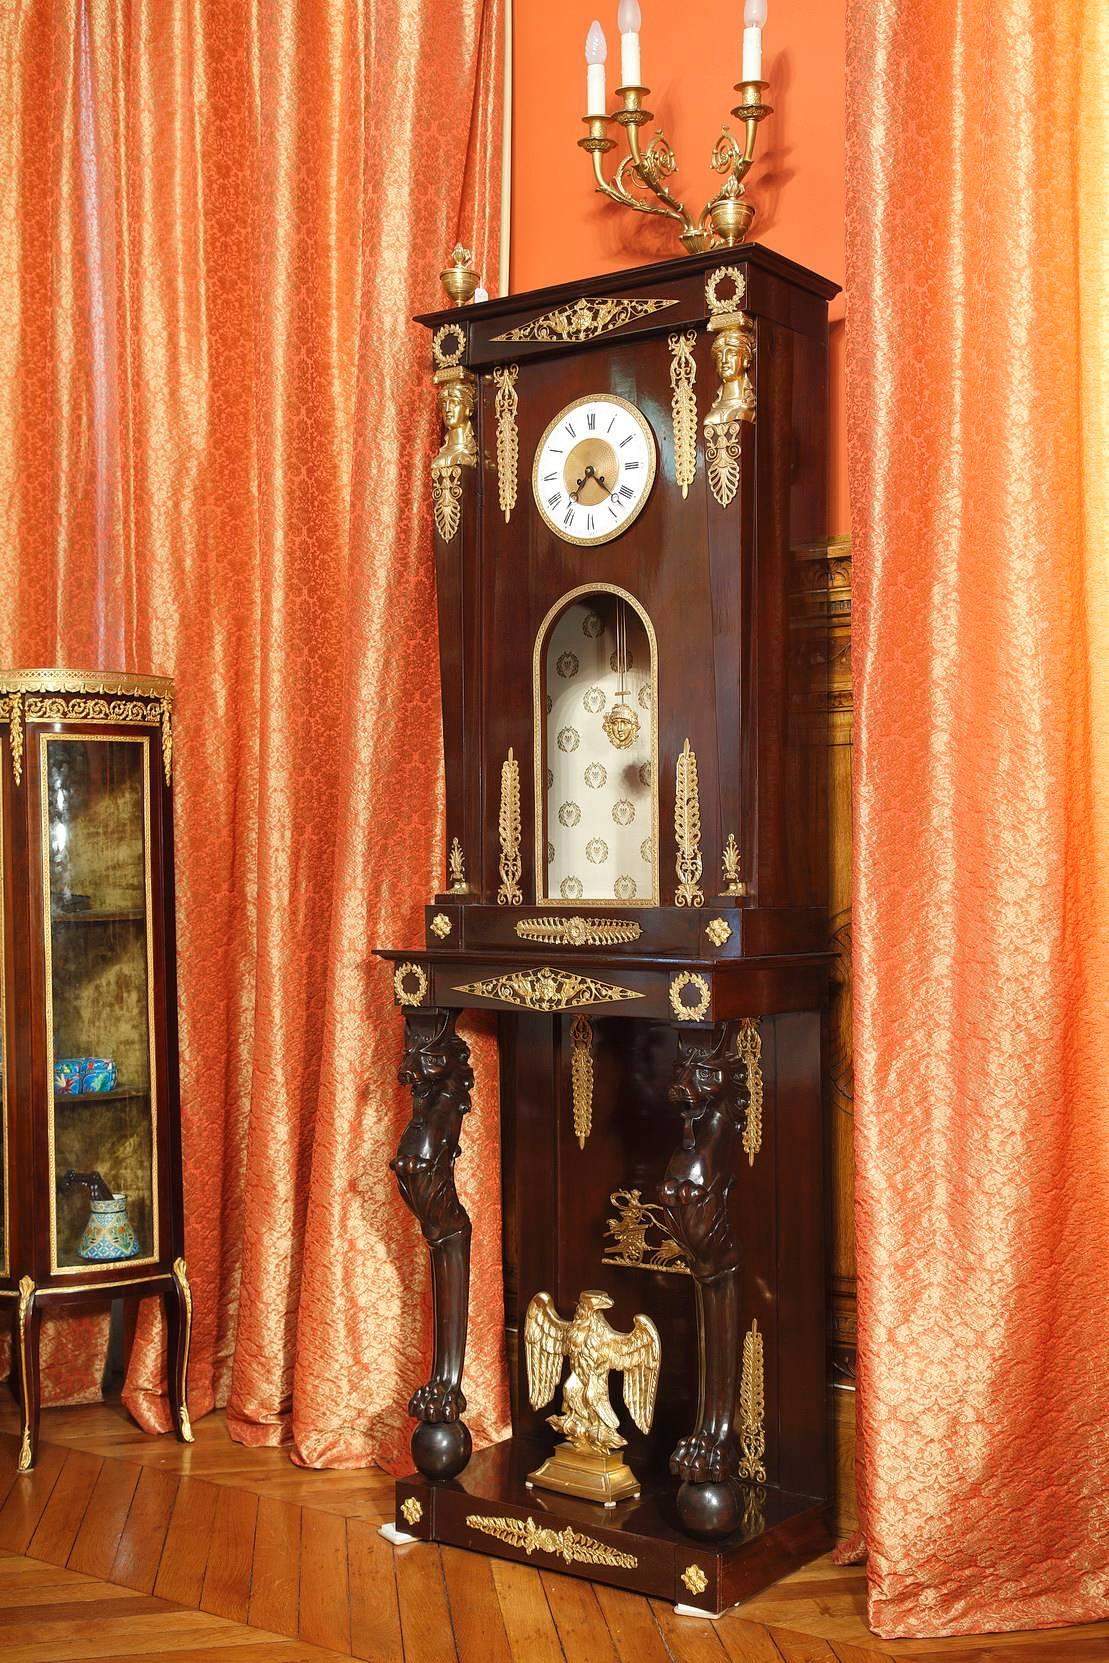 Impressive mahogany longcase clock with gilt and sculpted decorative bronze elements such as fantastic animals, diamond-shaped patterns, scrollwork, and foliage. This floor clock is composed of two parts: the upper part which contains the white